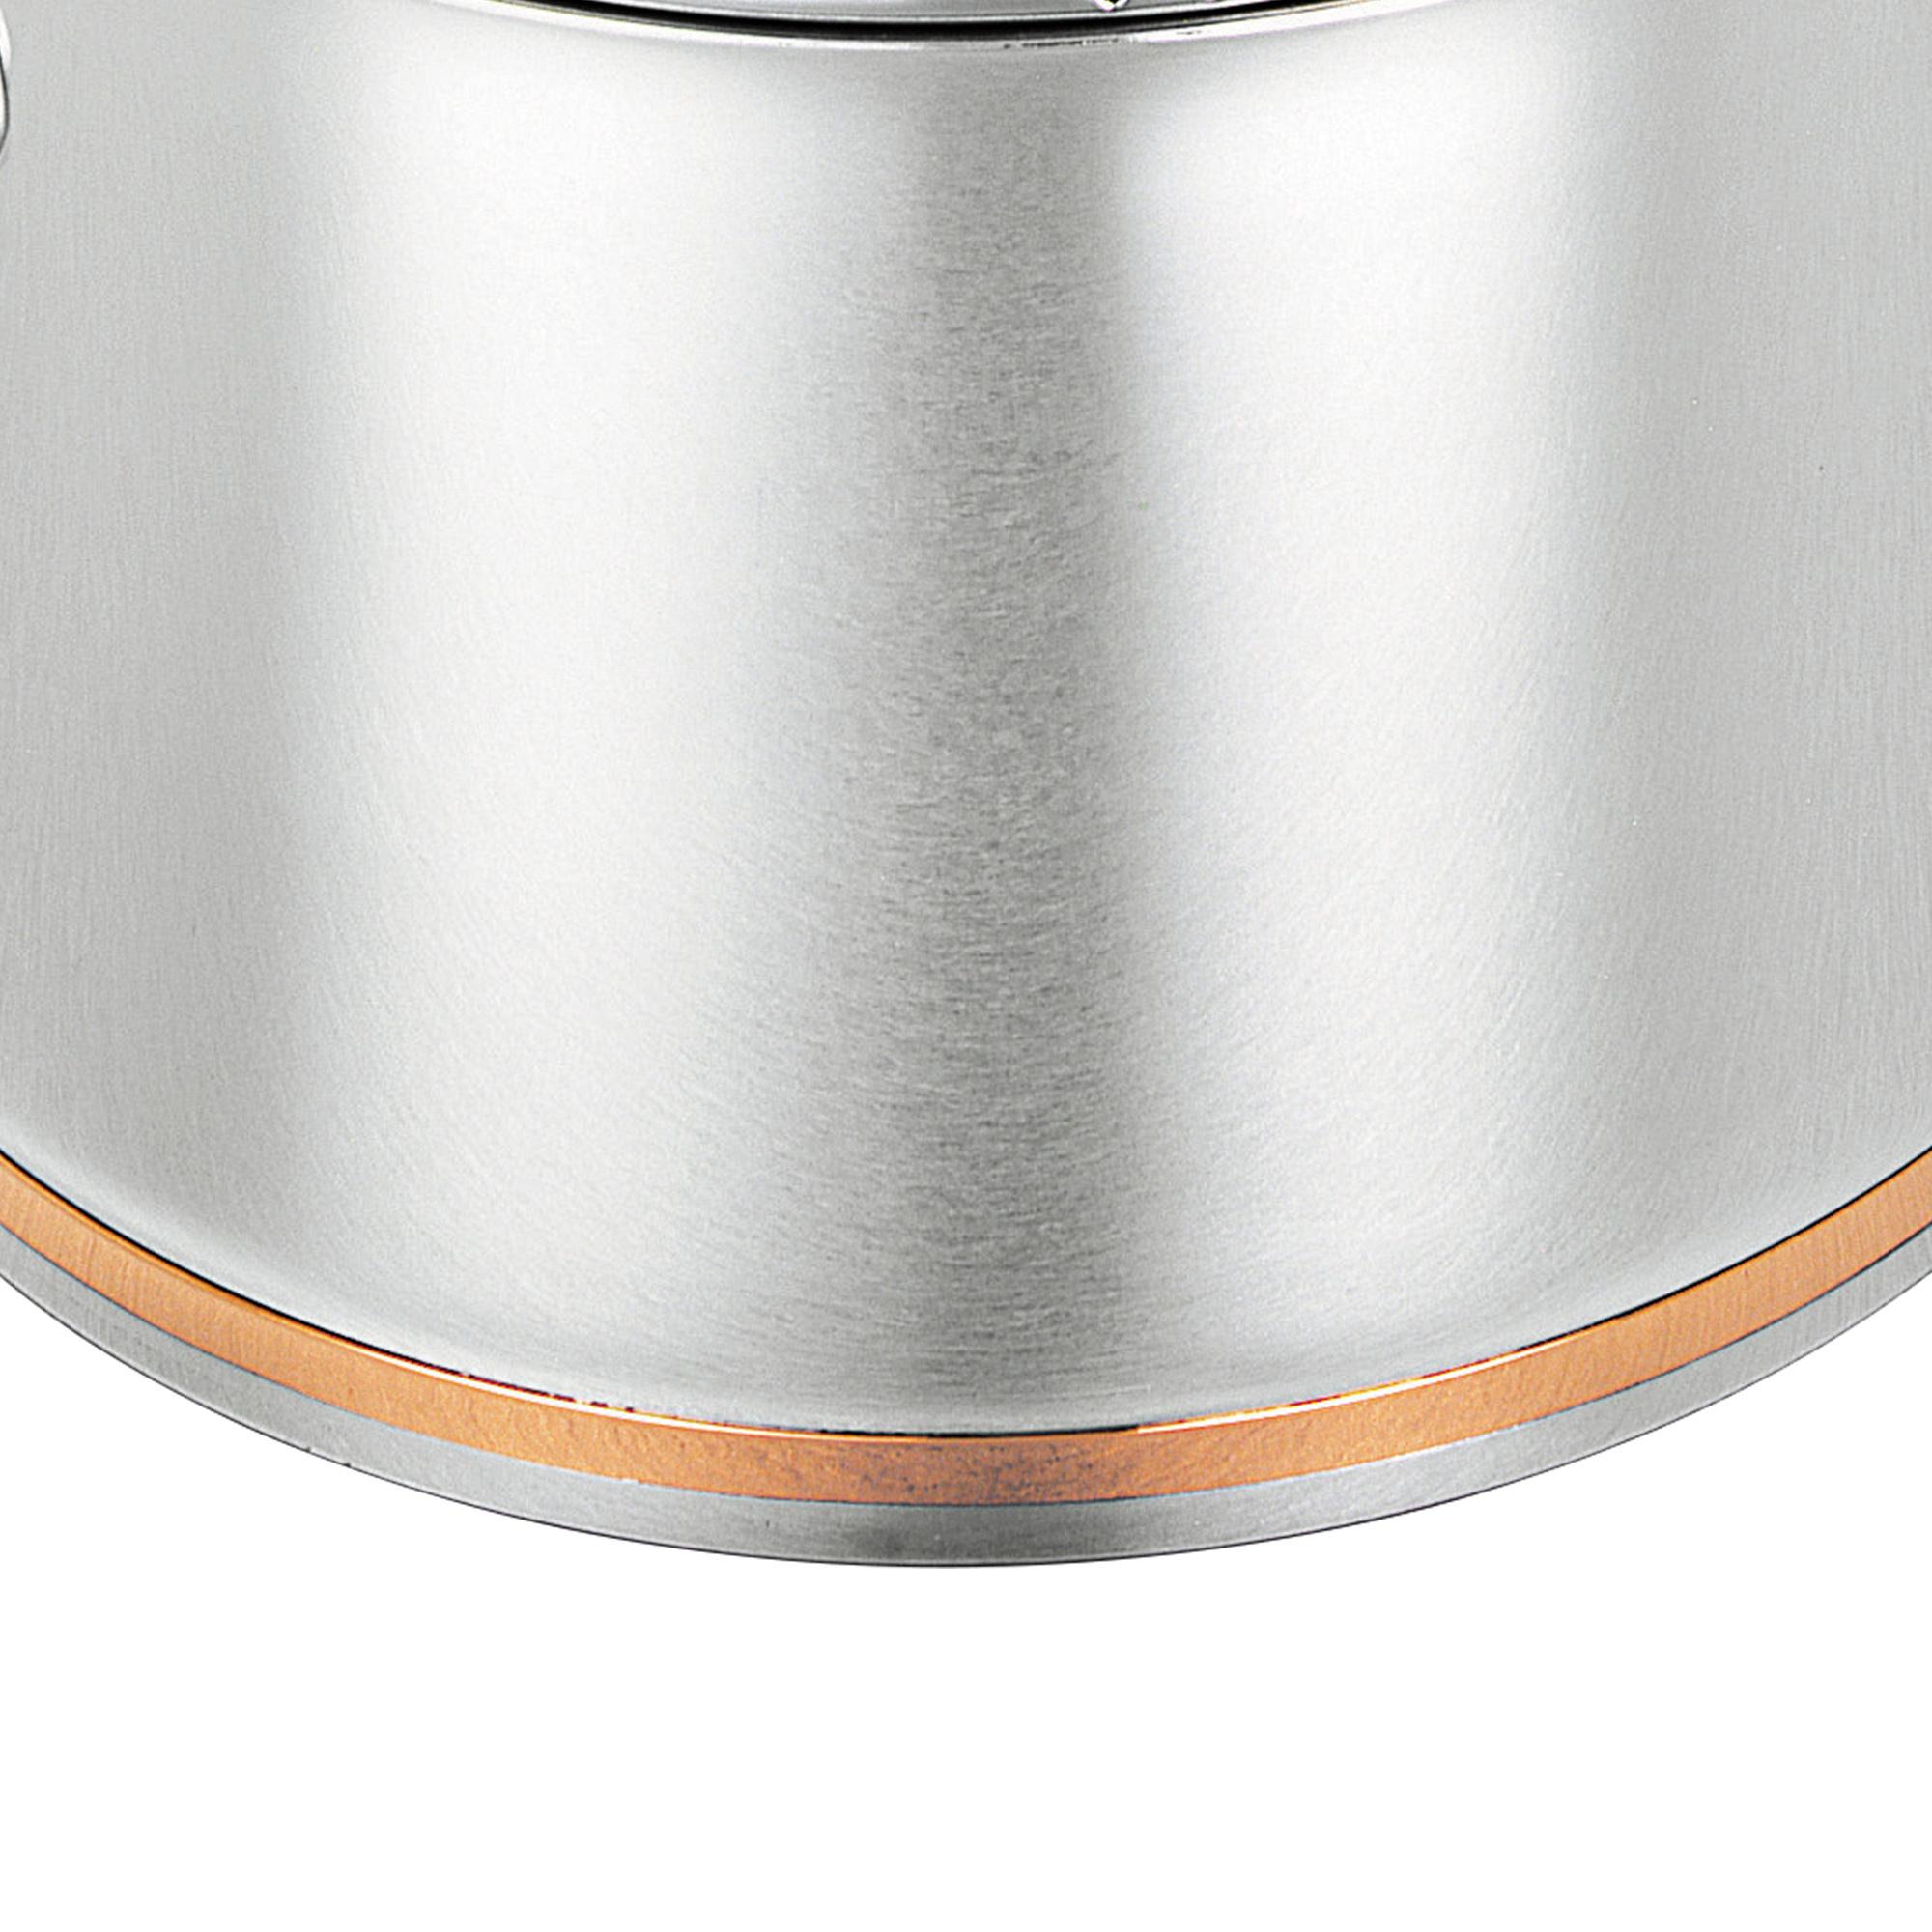 Scanpan Coppernox Stainless Steel Covered Saucepan 20cm - 3.5L Image 5